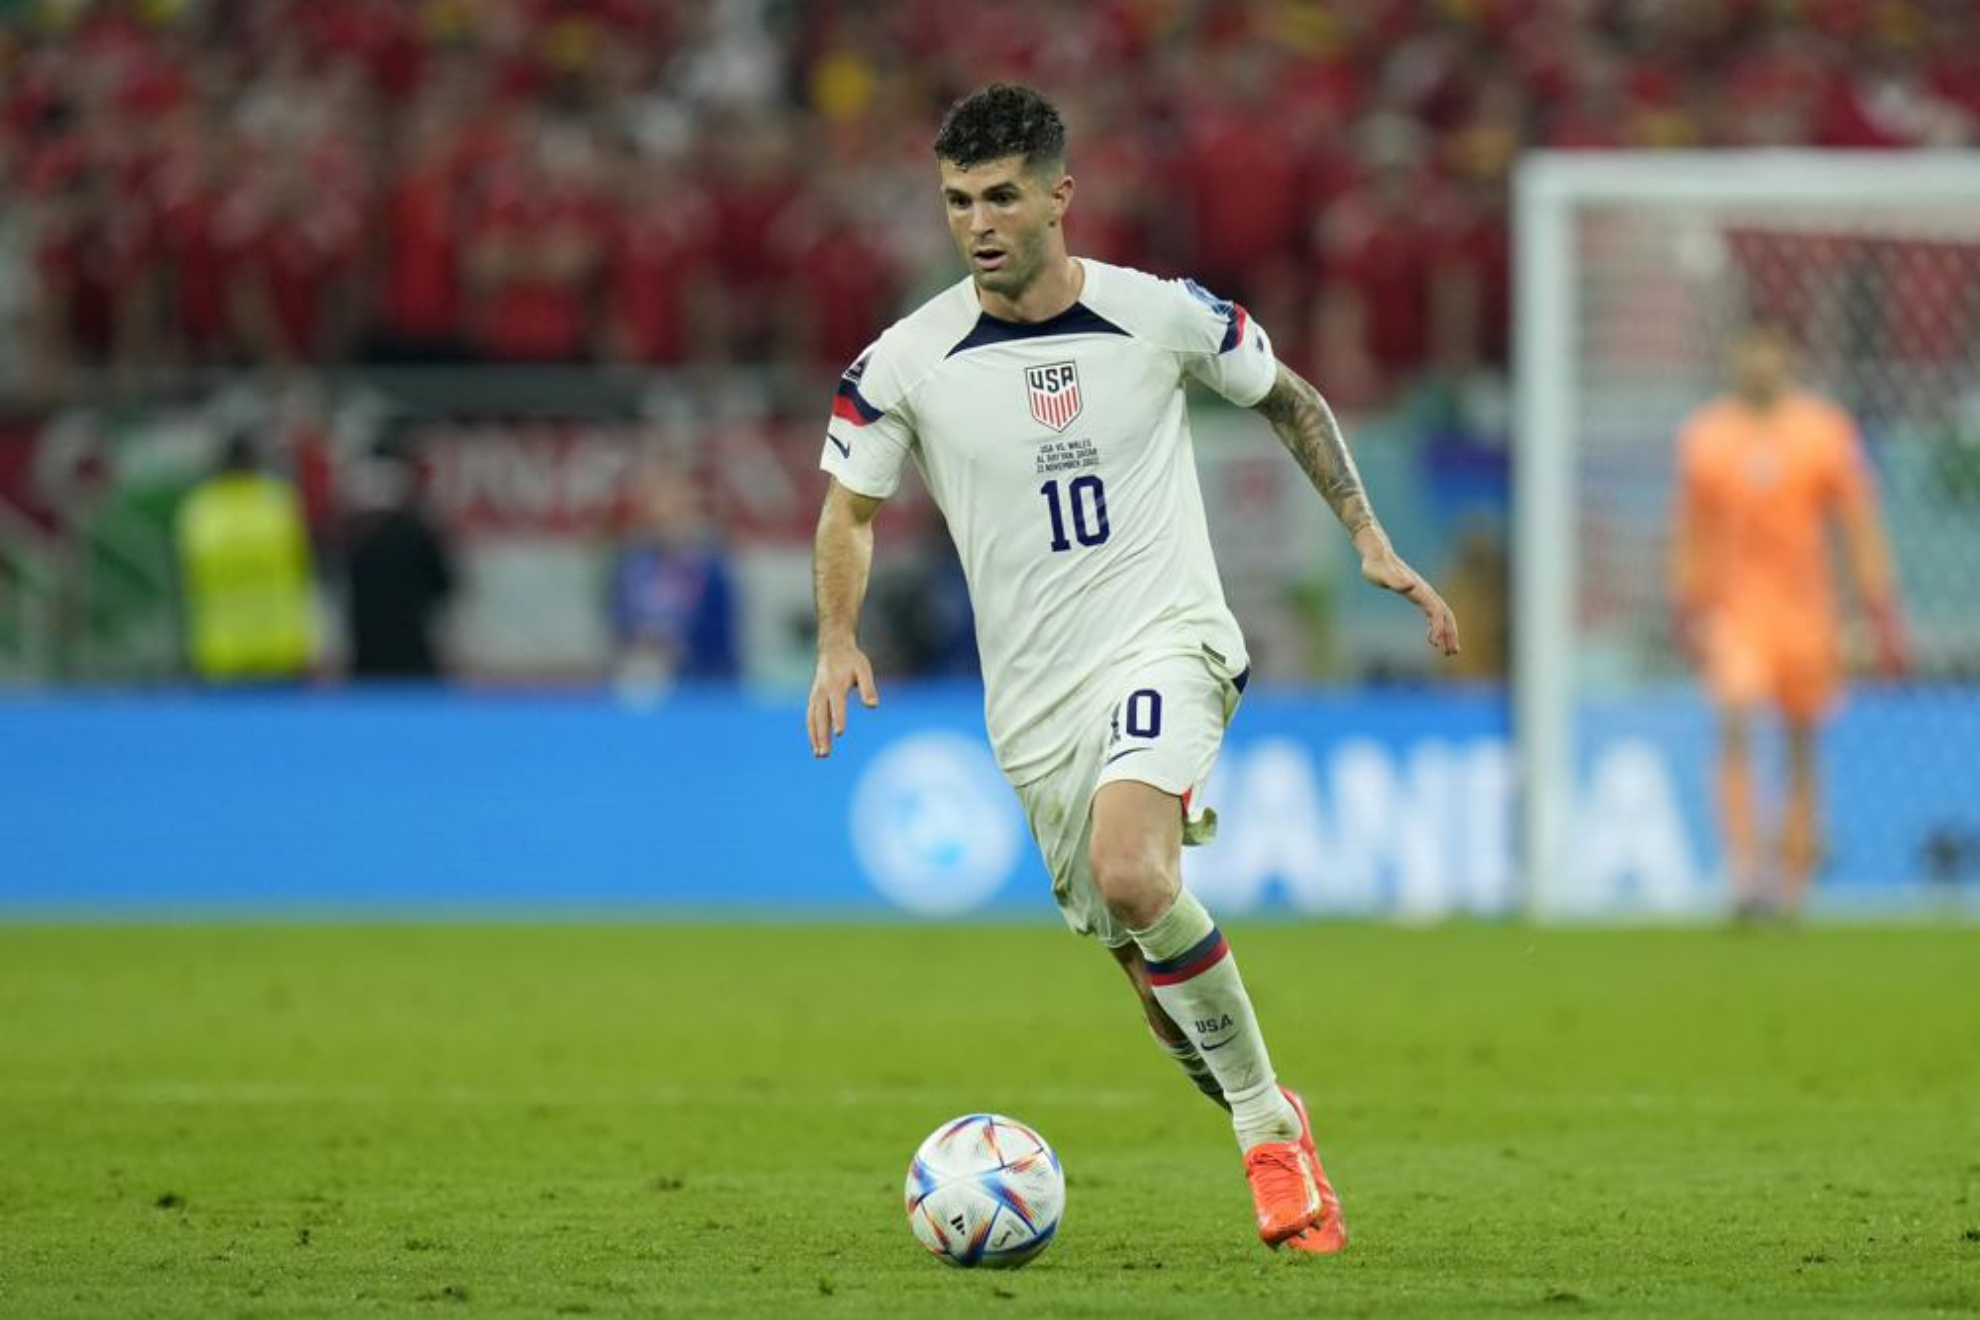 Christian Pulisic runs with the ball during the World Cup match against Wales.